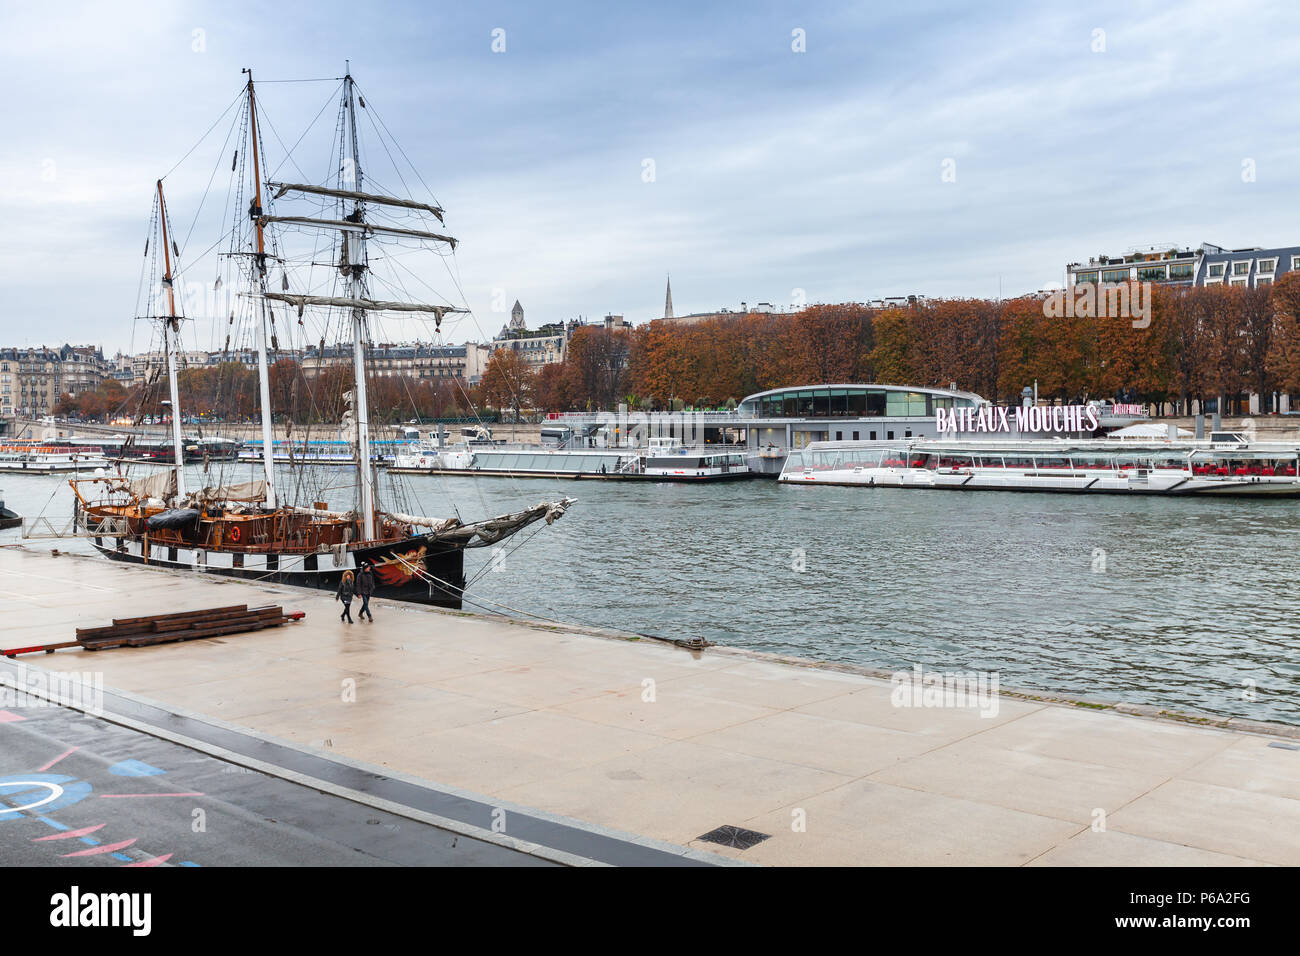 Paris, France - November 4, 2016: Embankments of Paris with moored sailing ship and pleasure boats, ordinary people walk on quayside Stock Photo